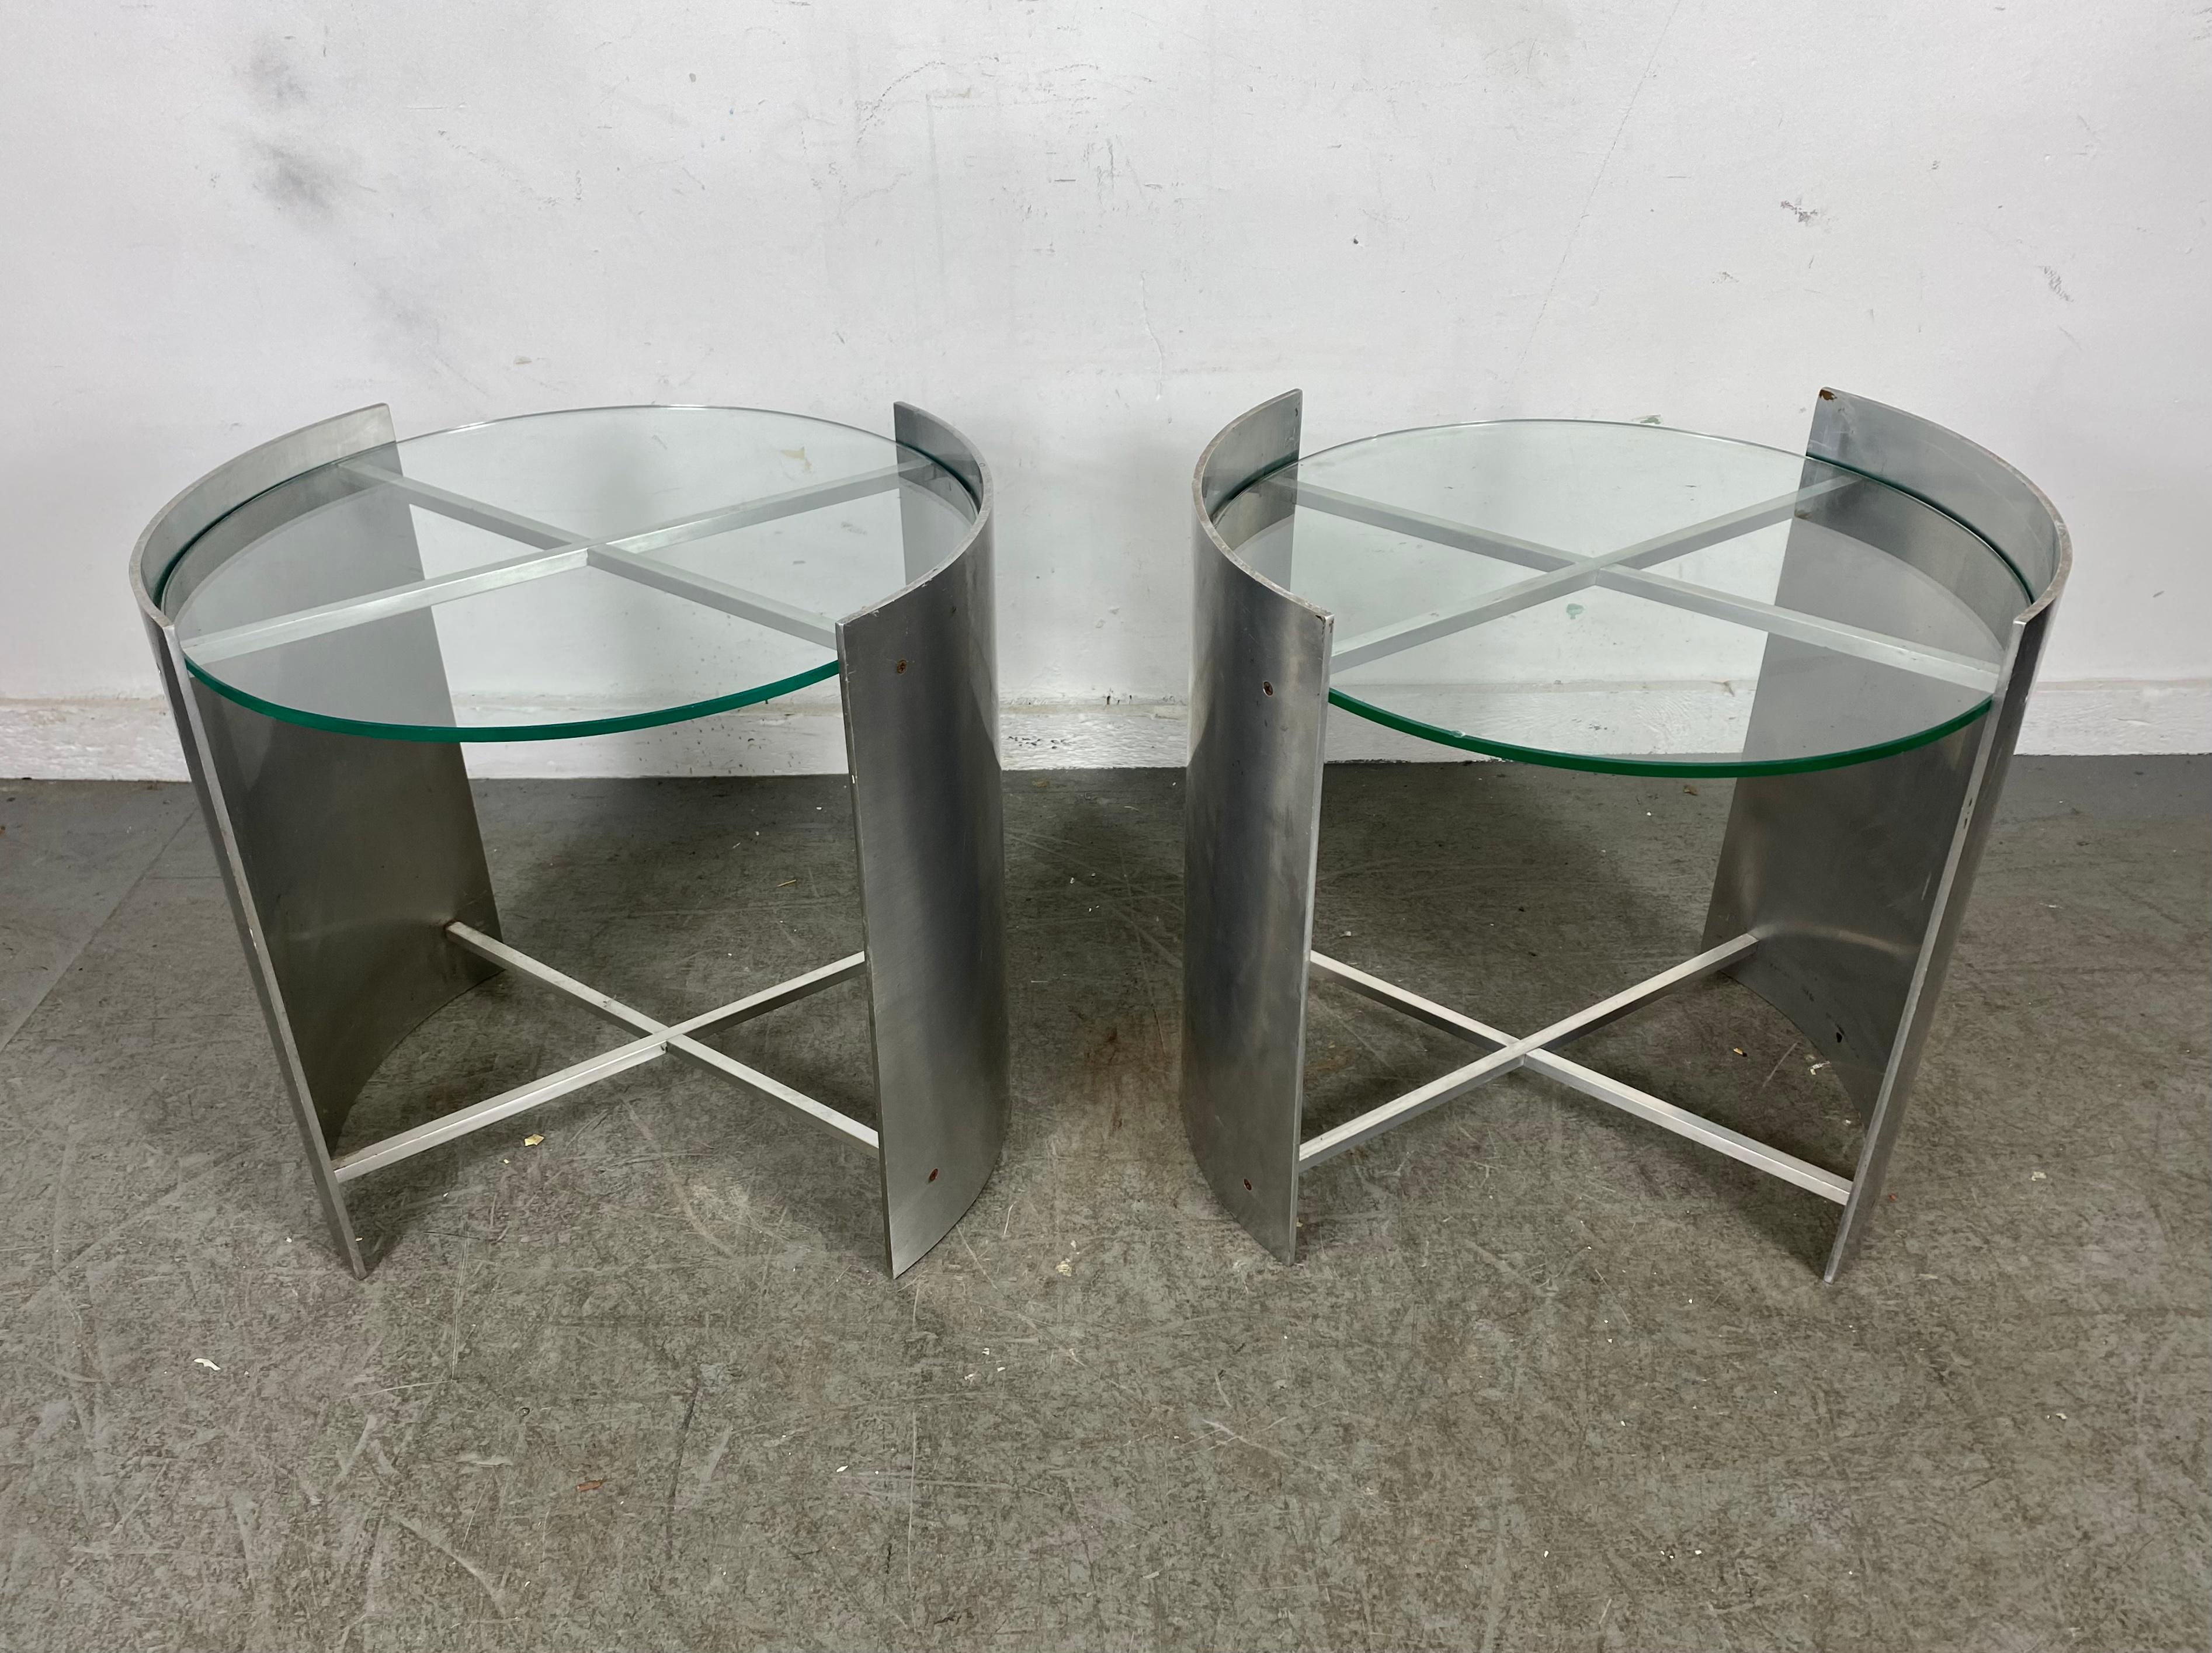 Post Modernist / Art Deco Style  Aluminum and Glass Tables For Sale 1